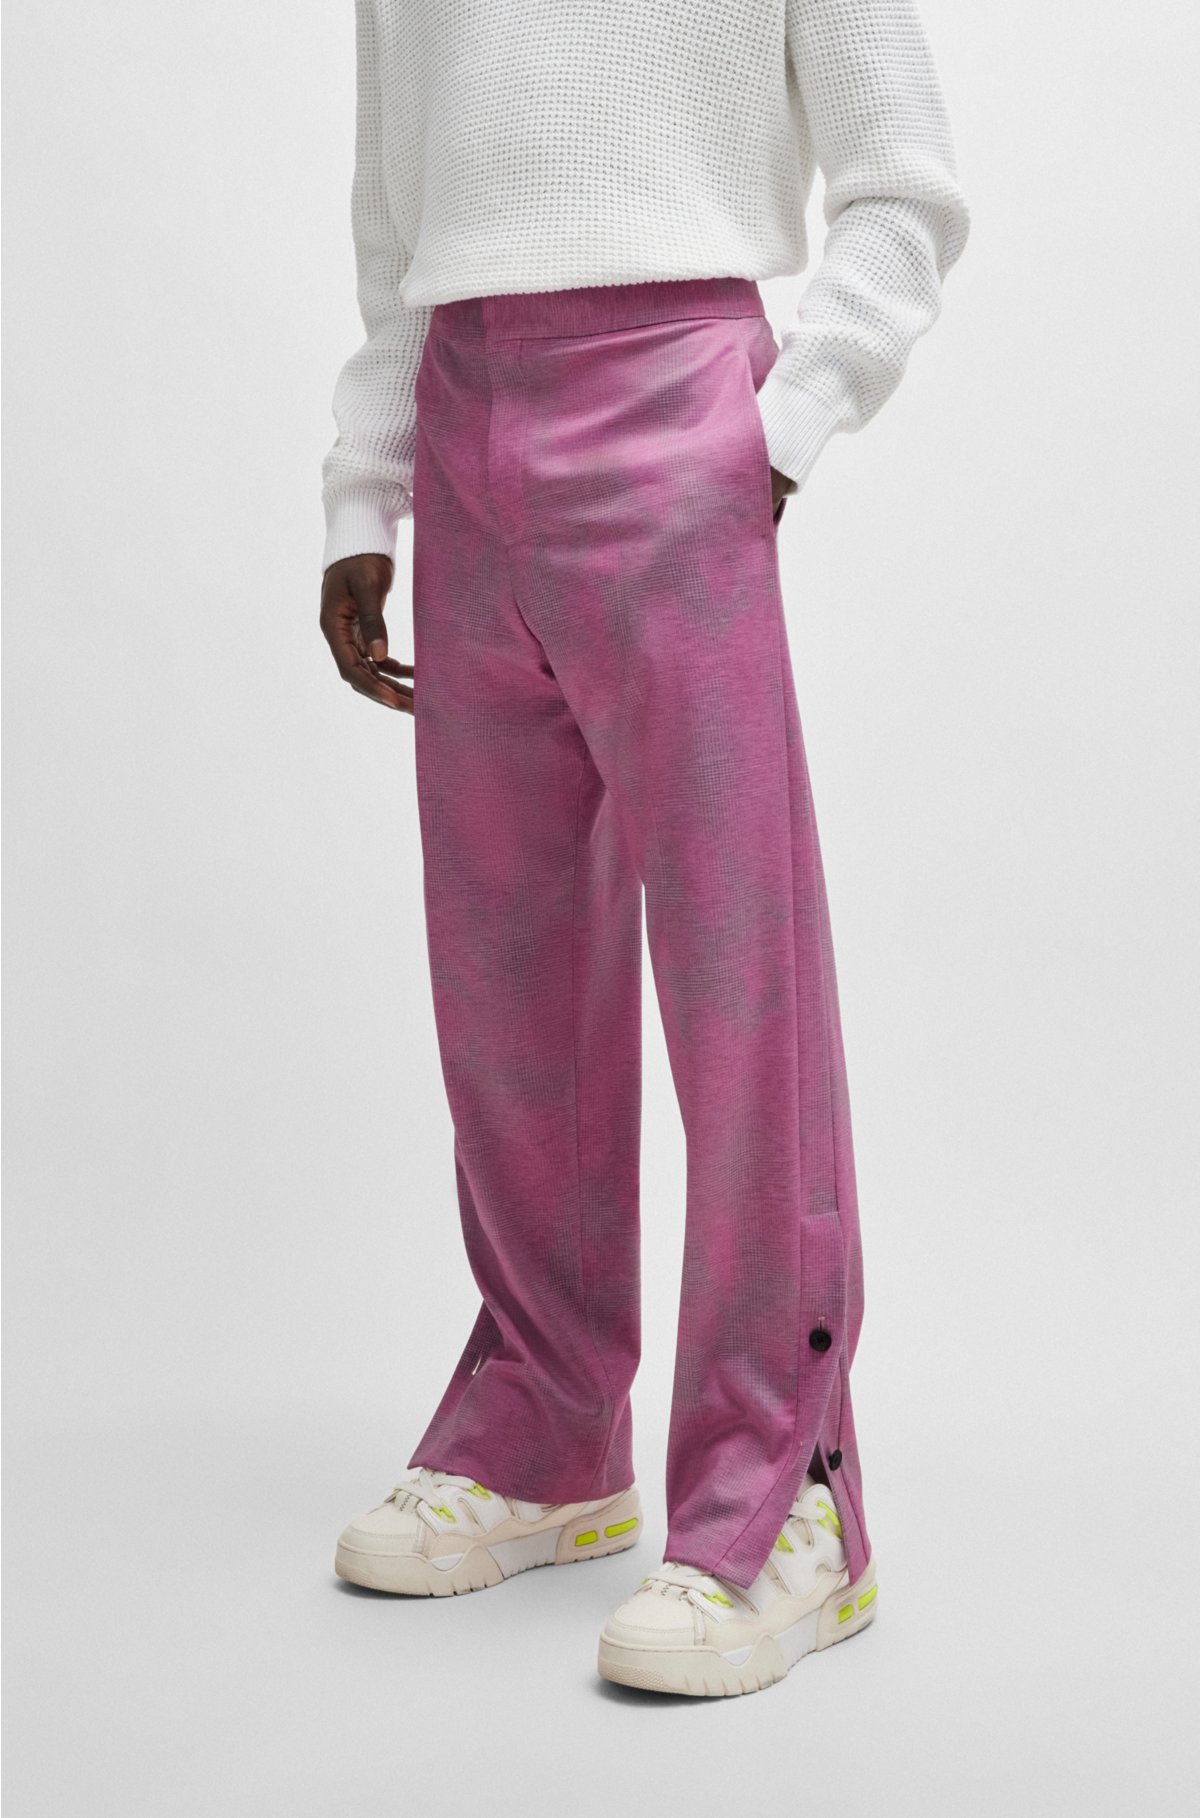 Modern-fit suit in printed performance-stretch fabric, light pink